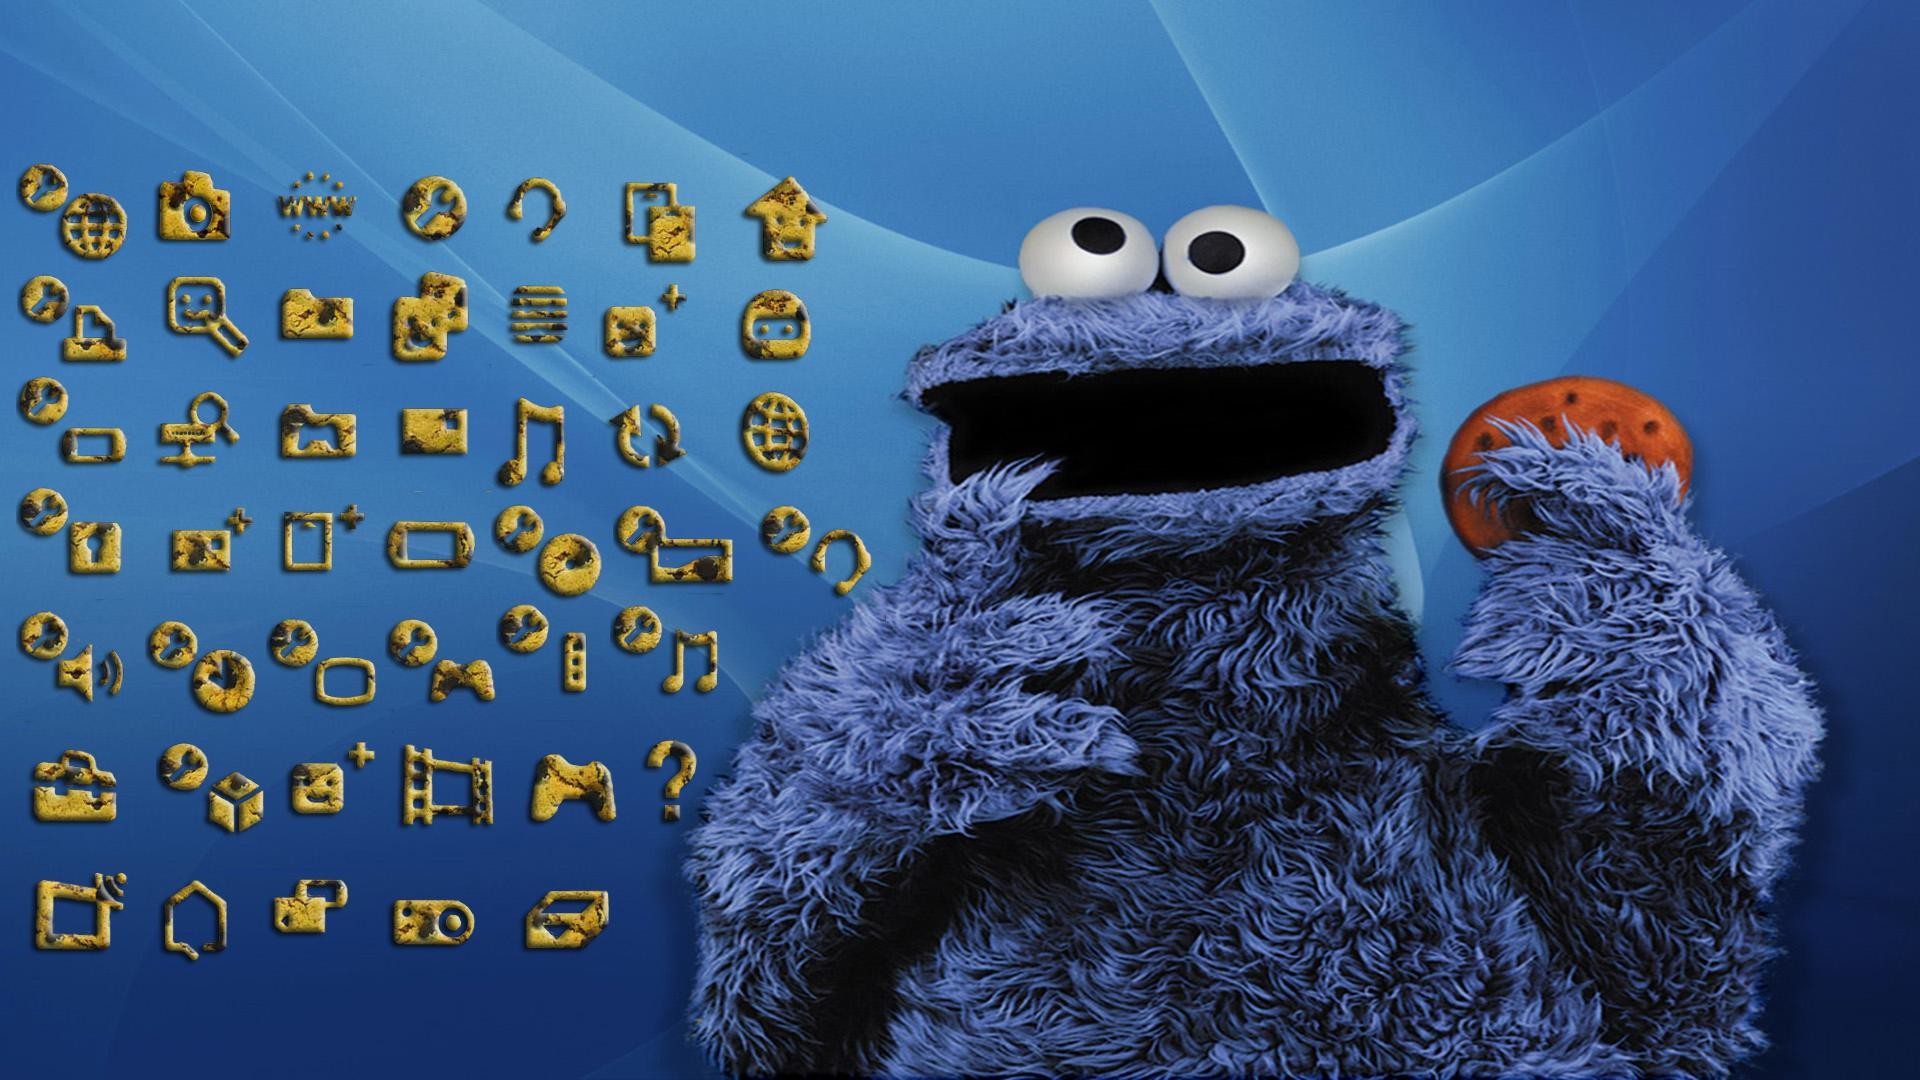 1920x1080 Cookie-Monster-Backgrounds-Free-Download